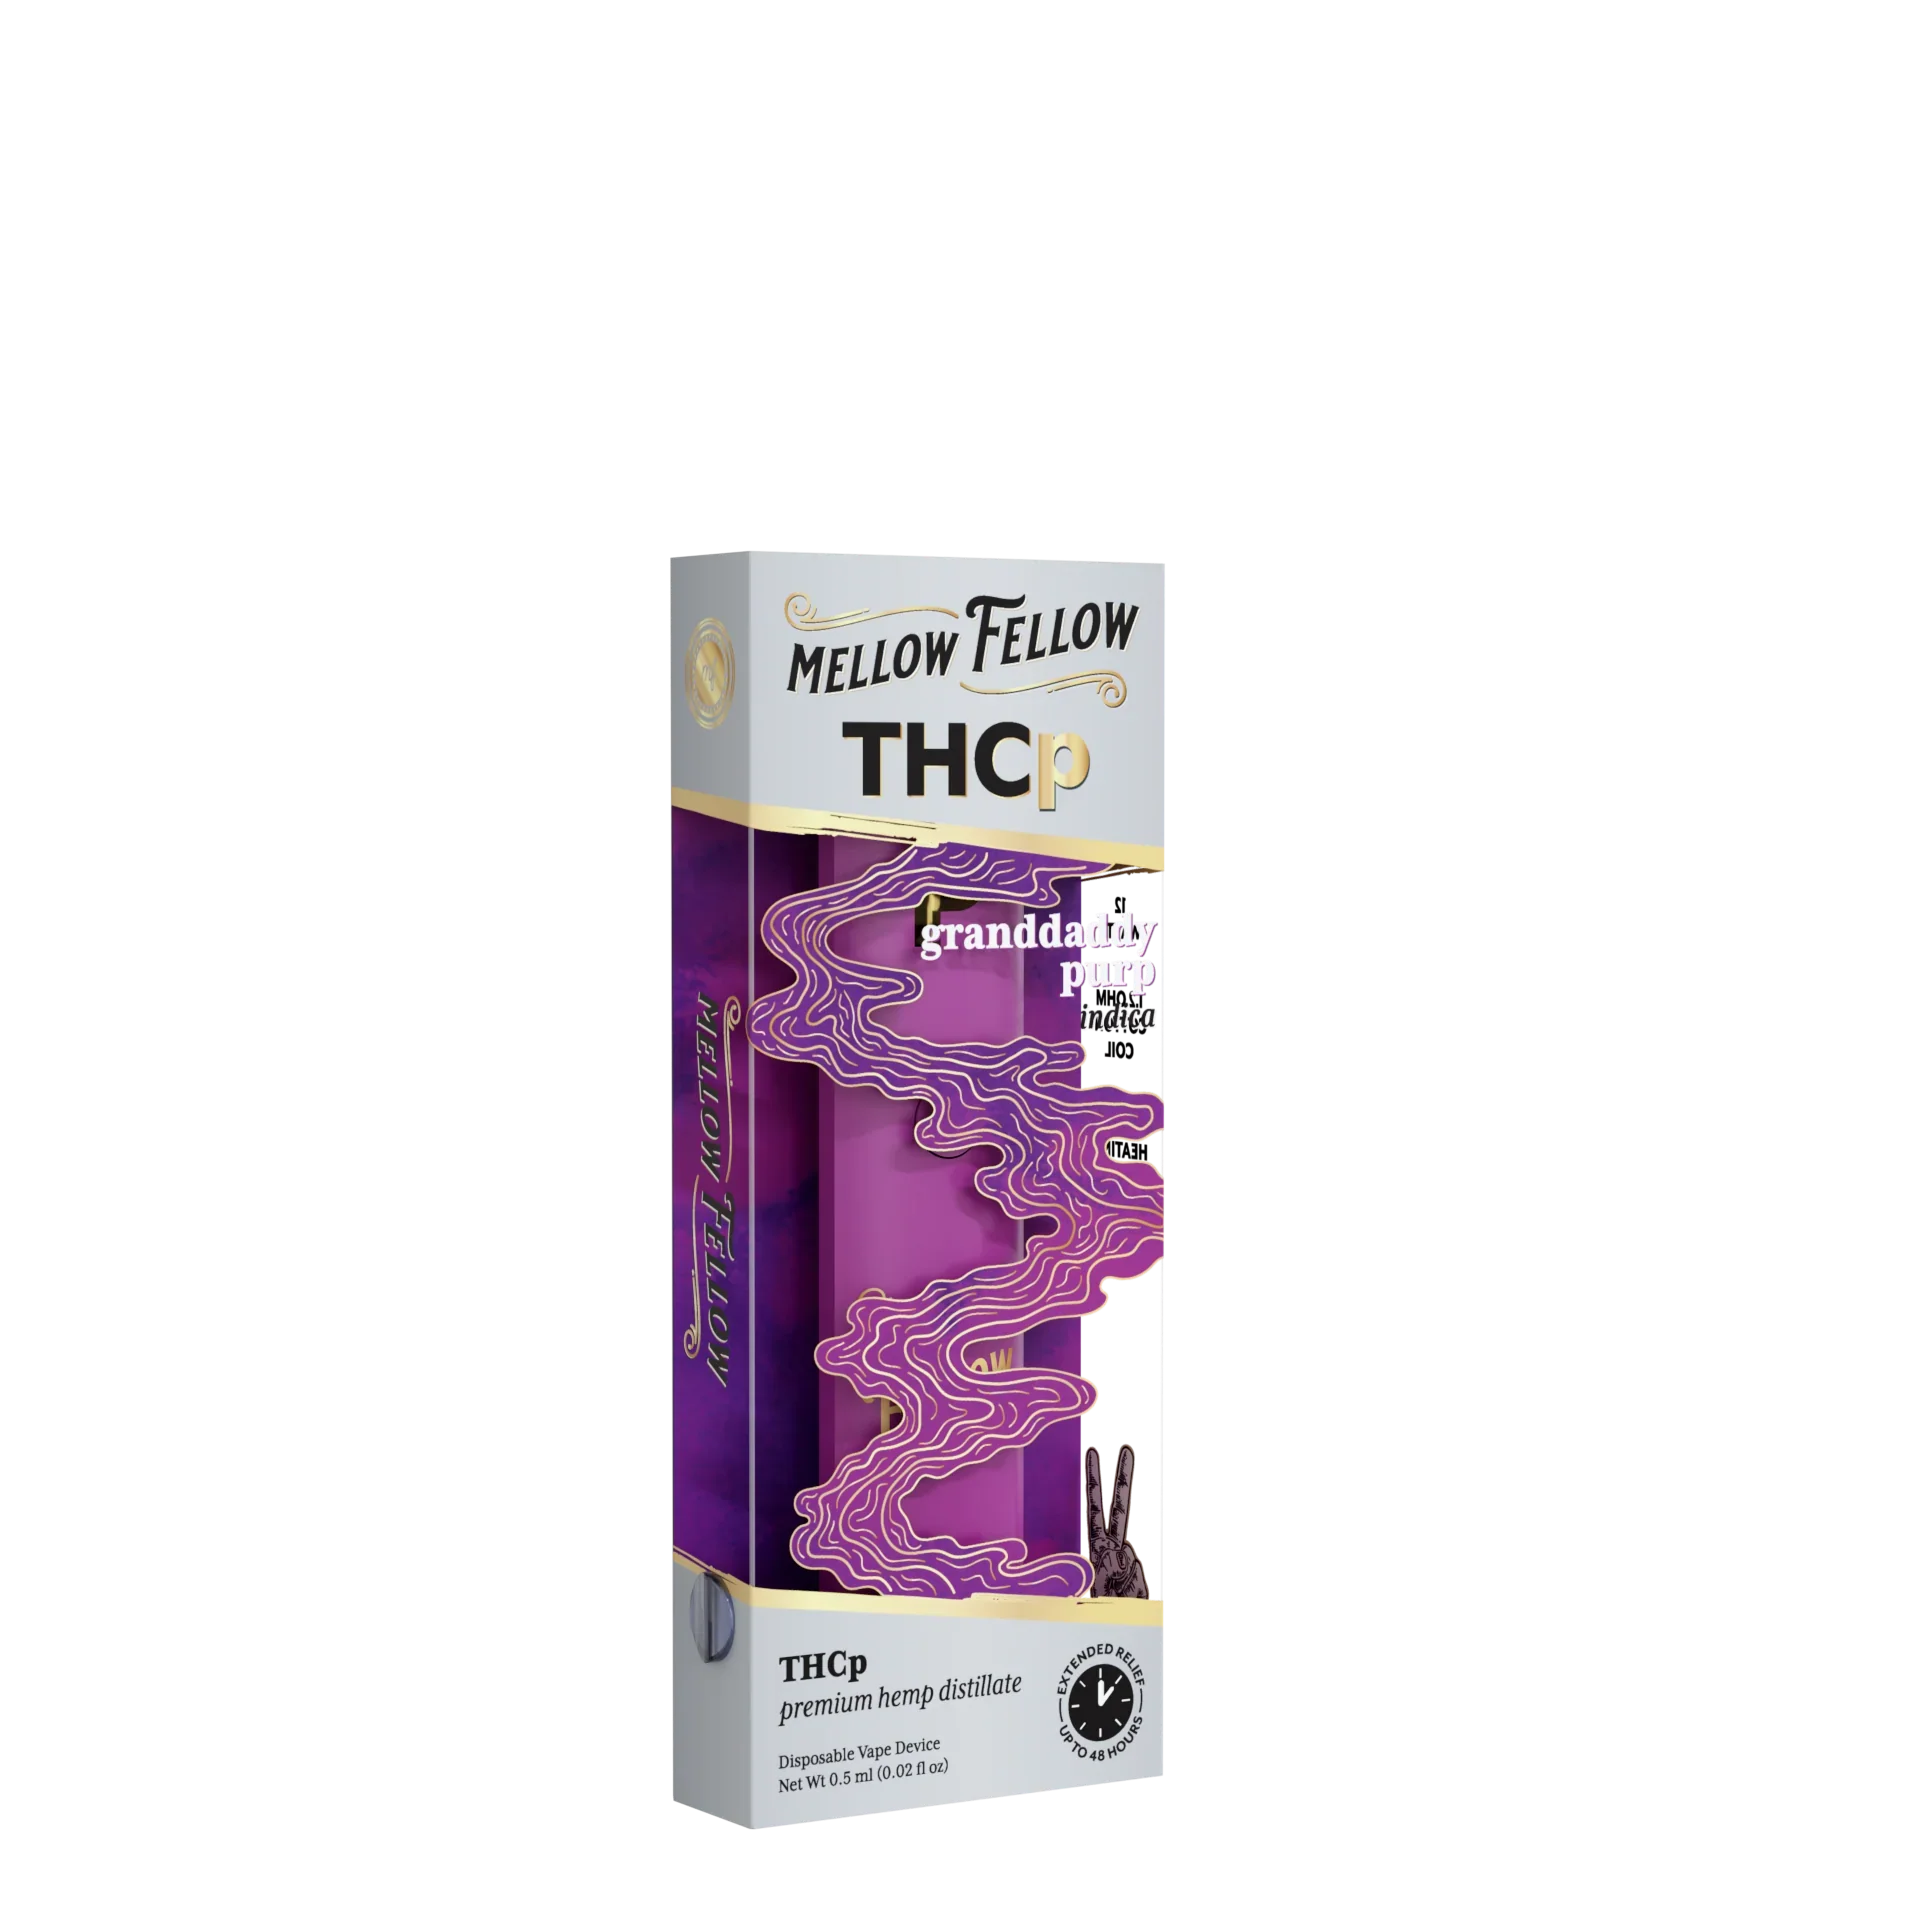 Mellow Fellow THCp 0.5g Disposable Vape - Granddaddy Purp (Indica) Best Price